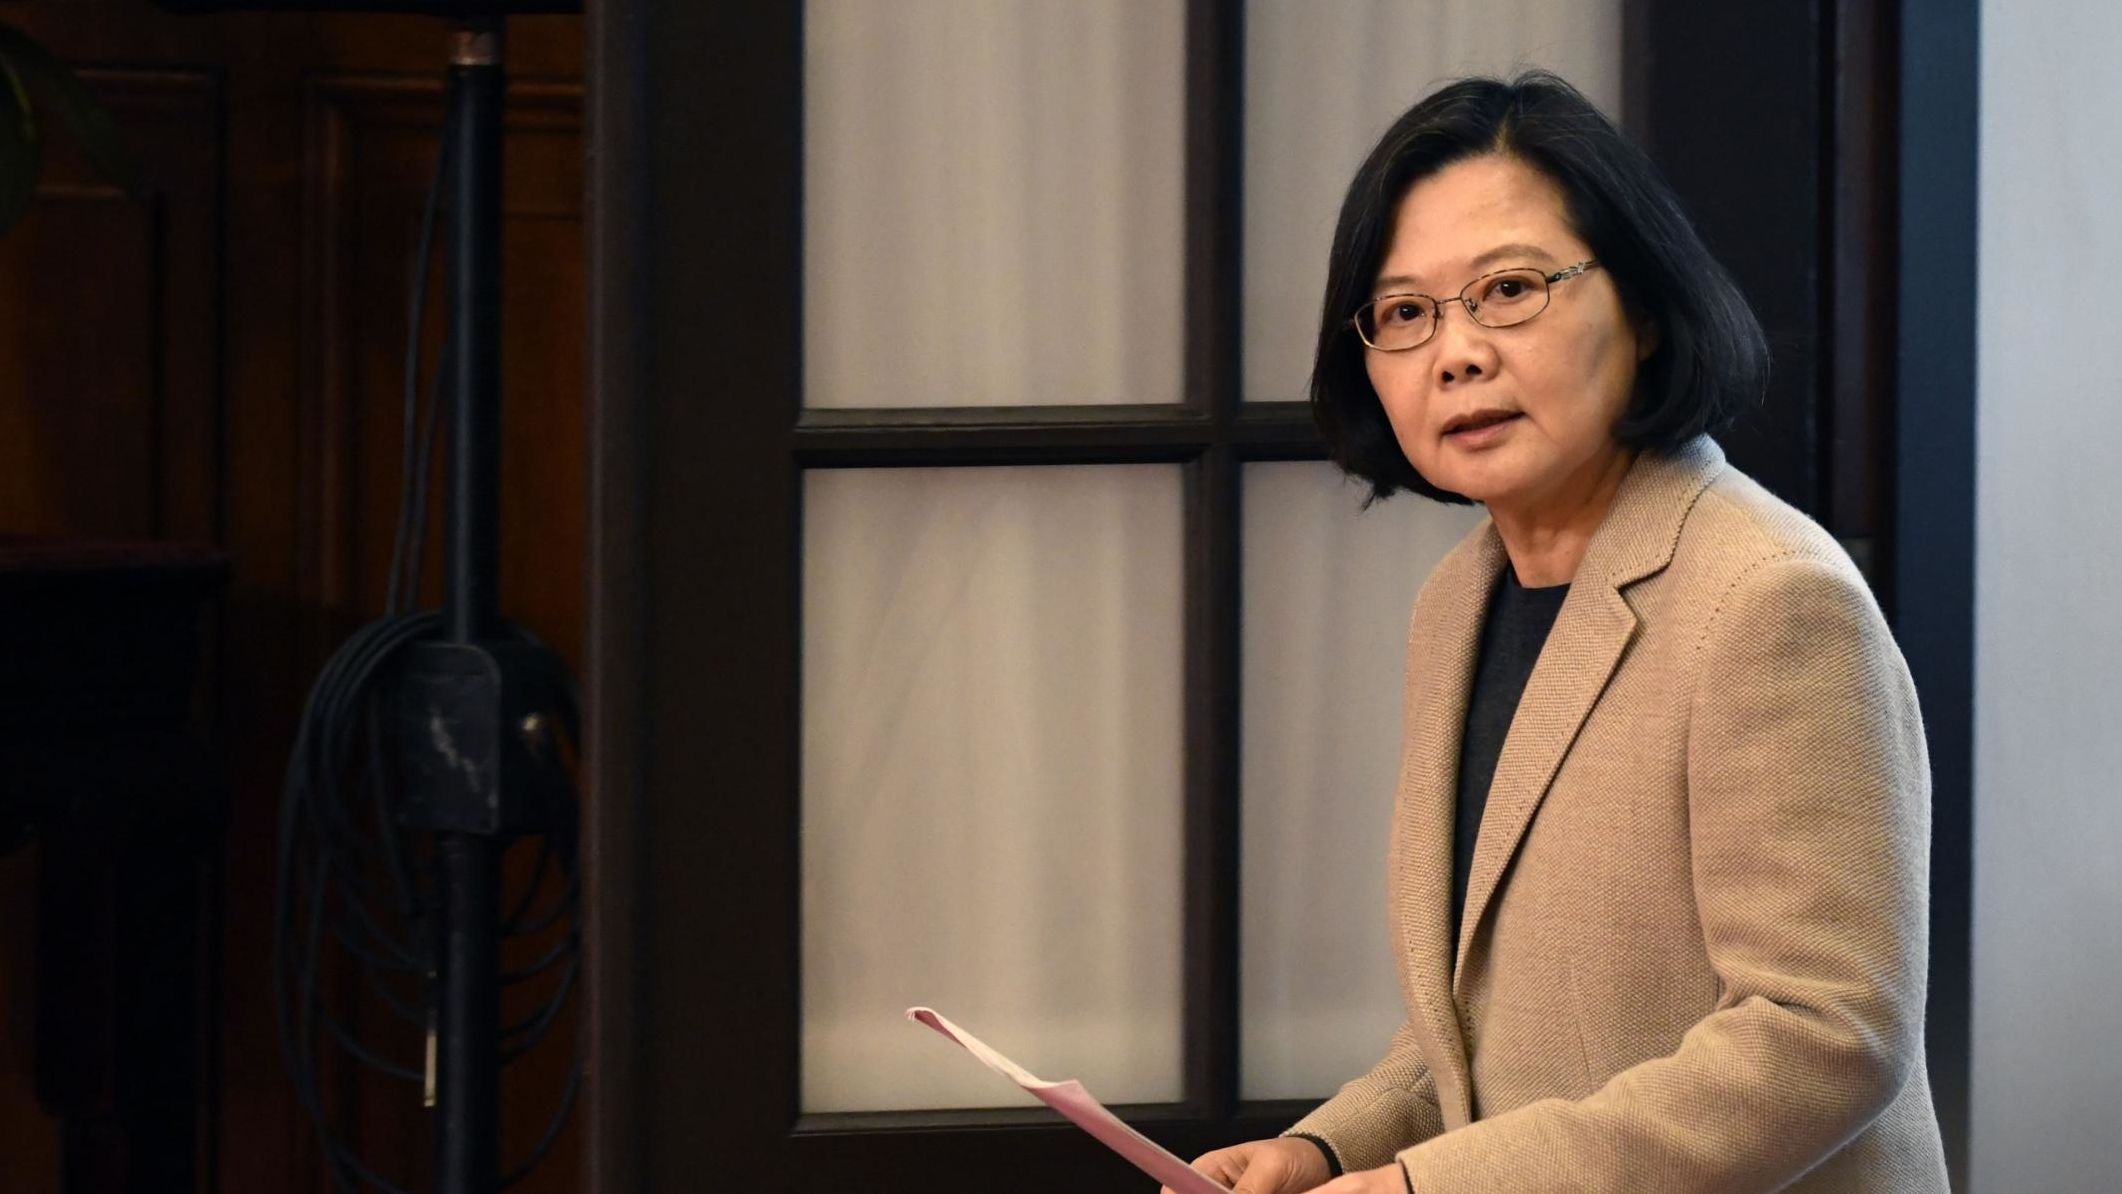 Taiwan's President Tsai Ing-wen arrives for a press conference at the Presidential Palace after the national flag raising ceremony in Taipei on January 1, 2019.